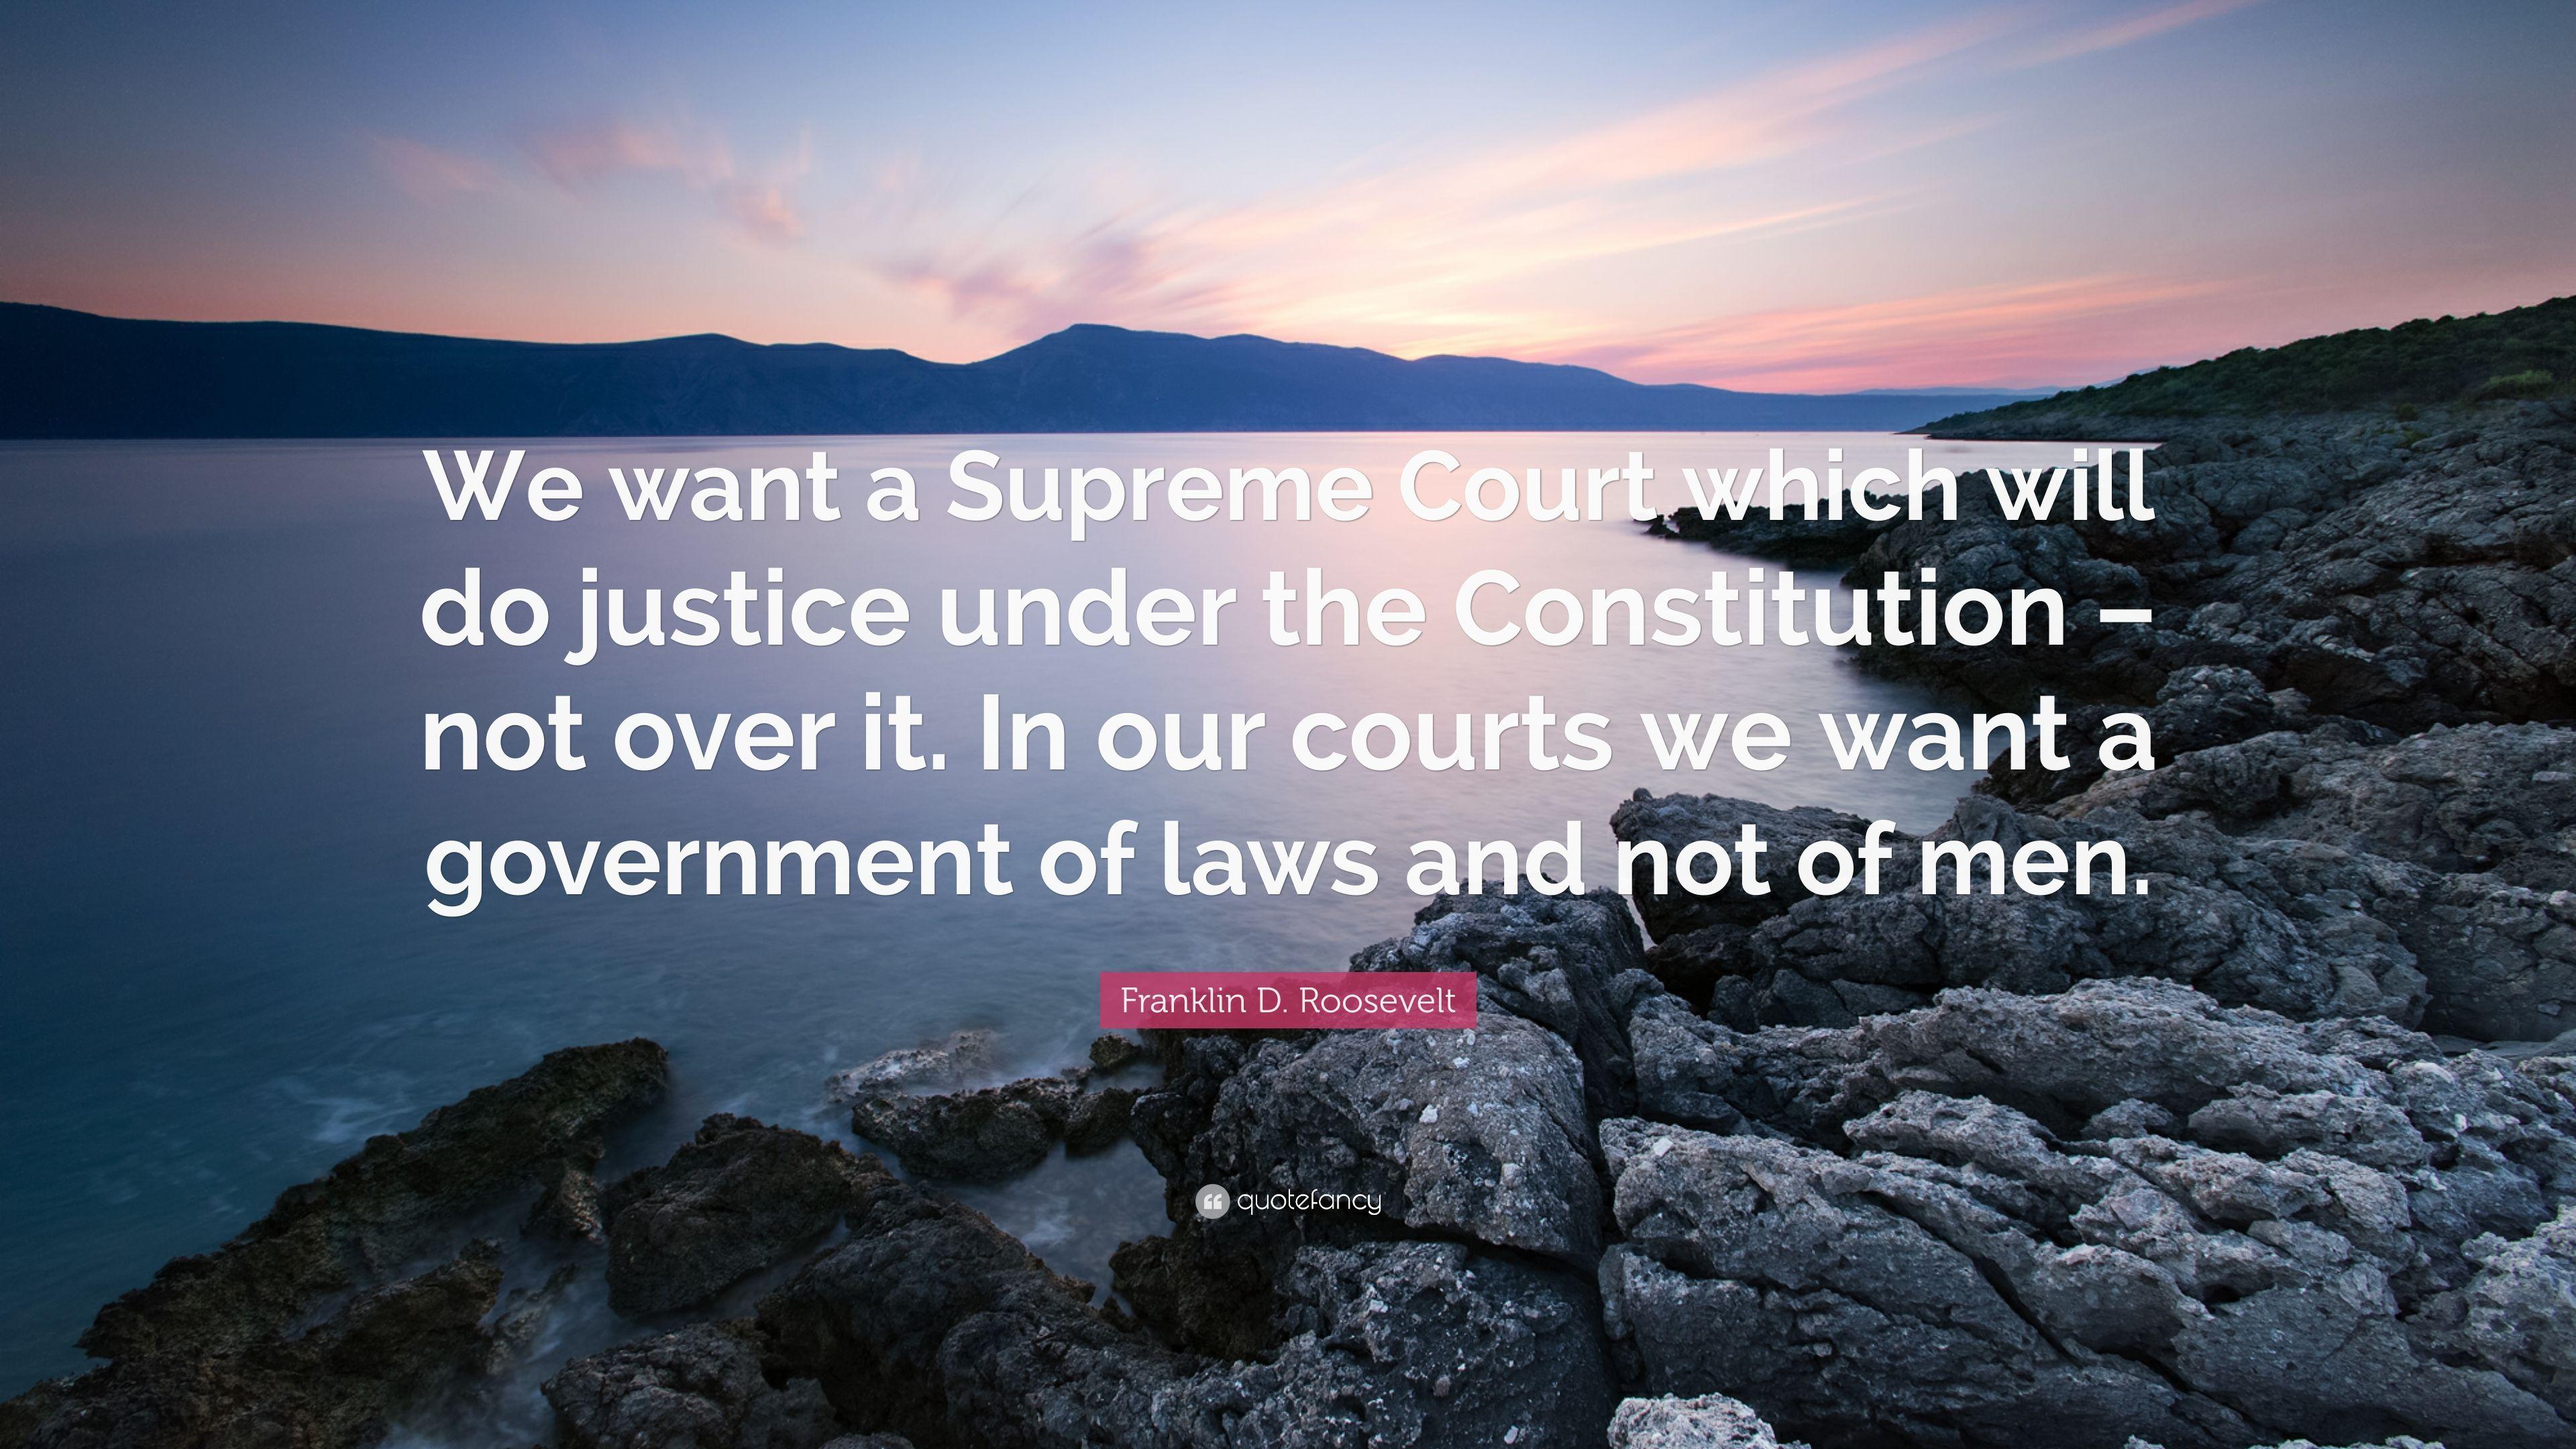 Franklin D. Roosevelt Quote: “We want a Supreme Court which will